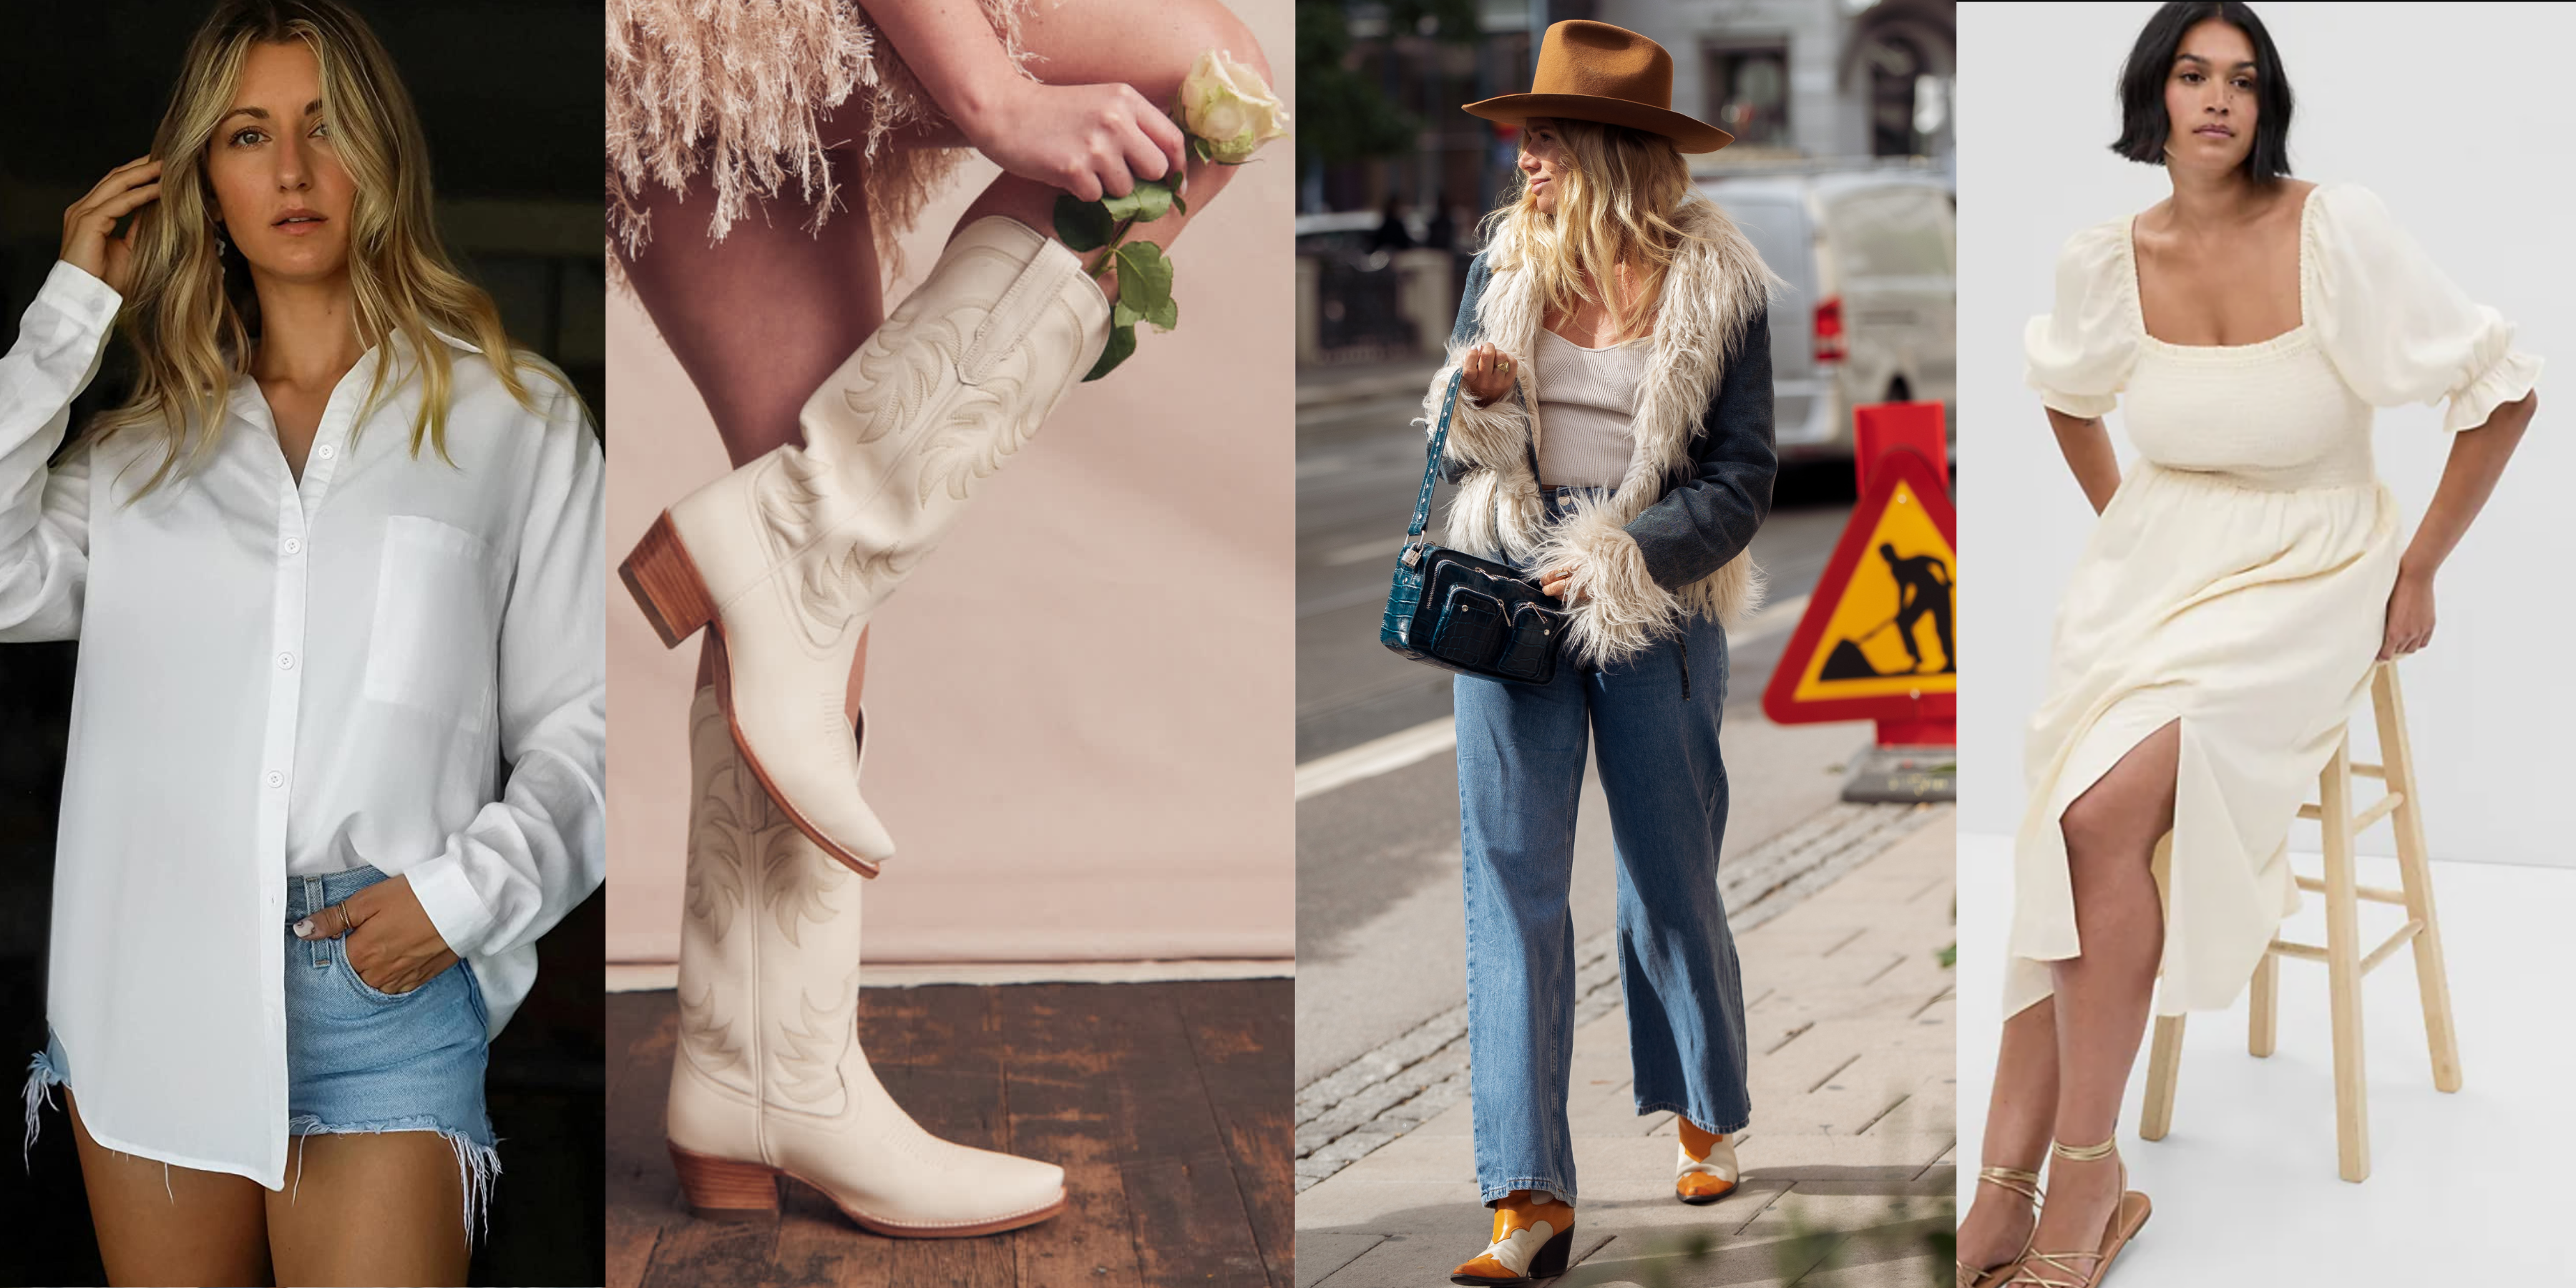 The Best Achieve Outfits the Cowgirl to Trend Coastal